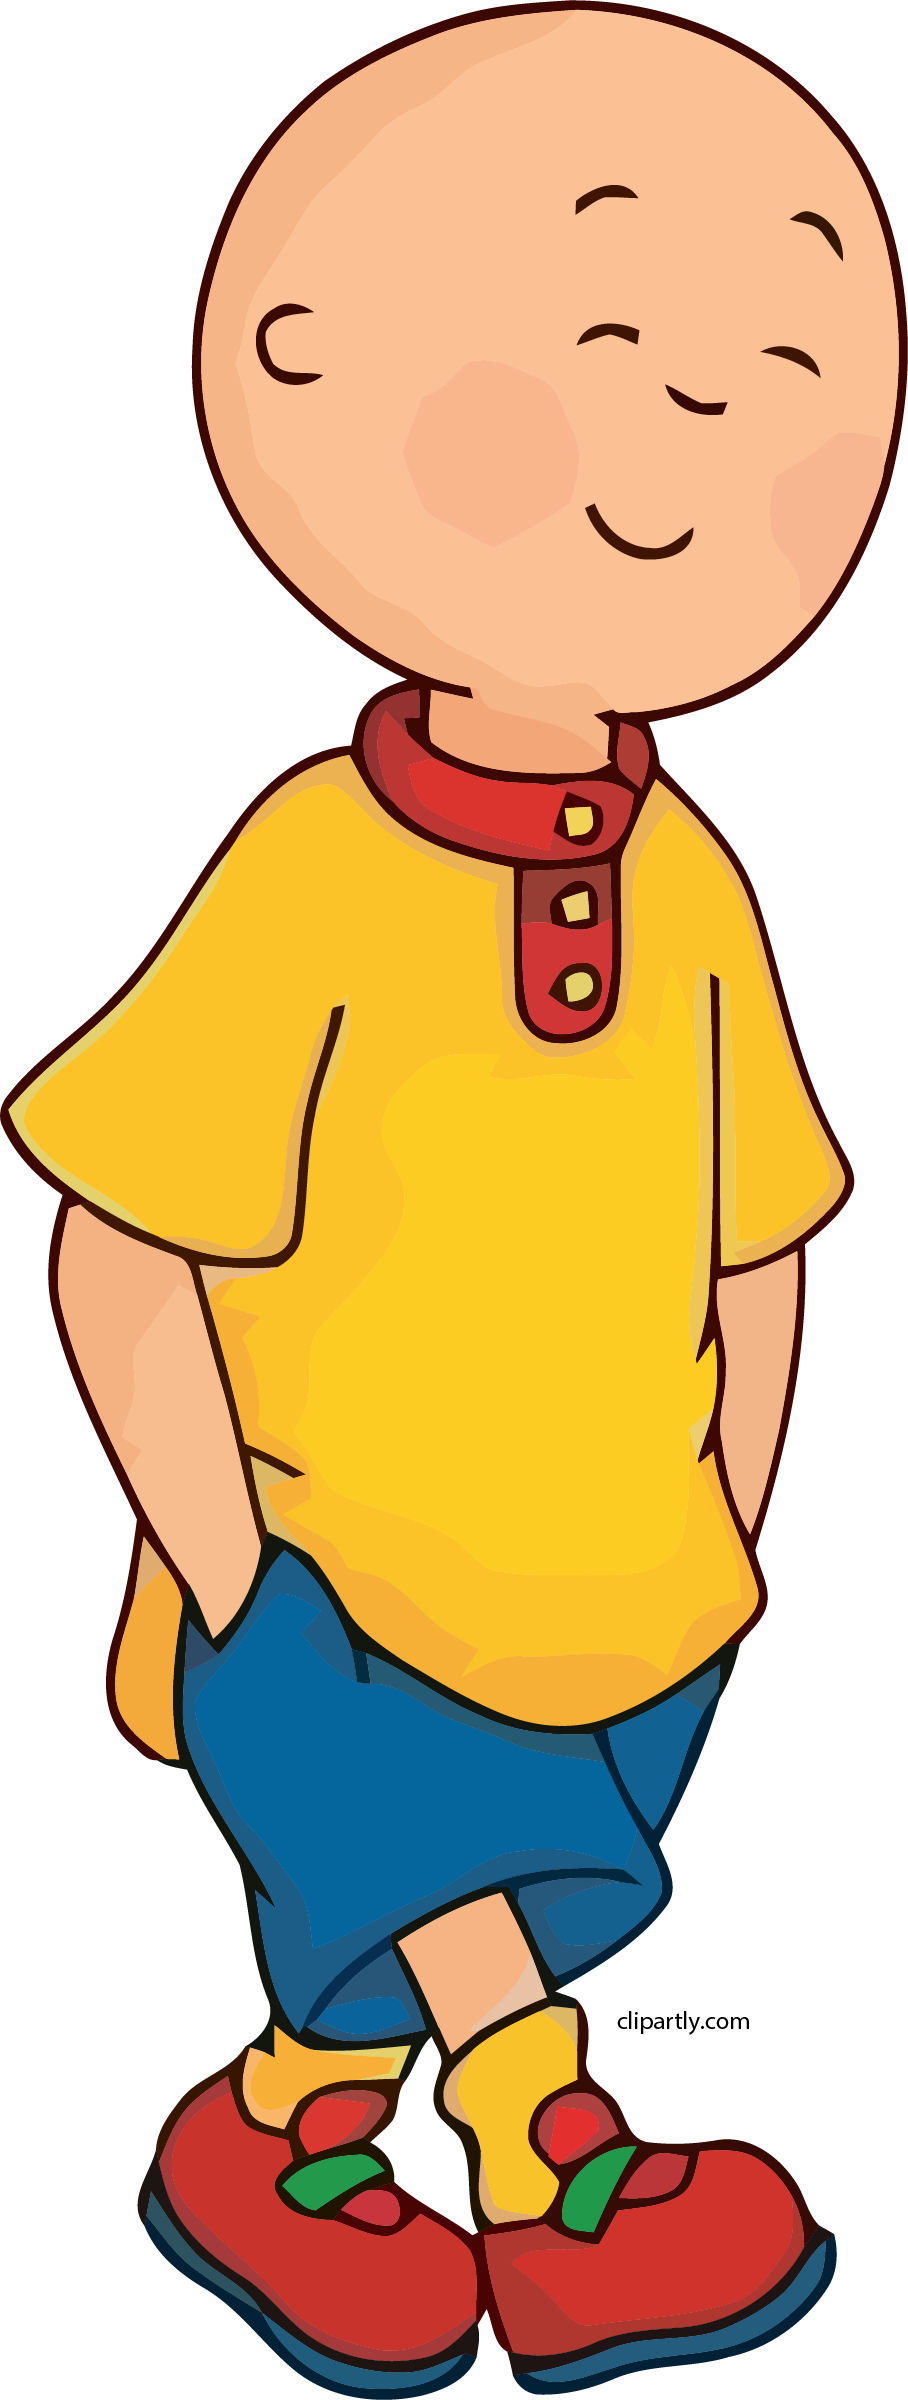 Caillou Clipart & Free Clip Art Images #27861.